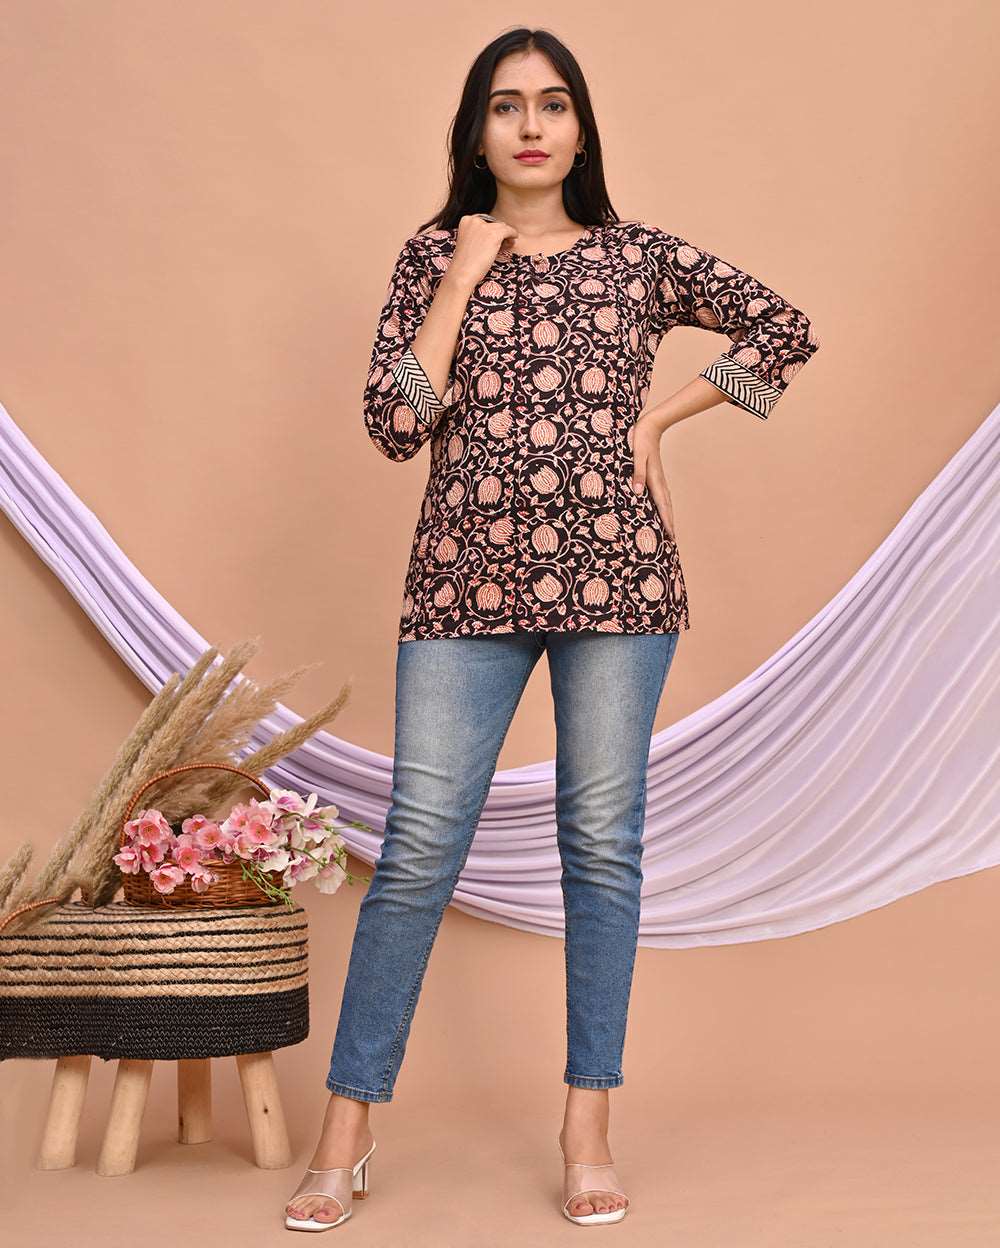 Top Simple A-line Kurti designs that are in style | Libas